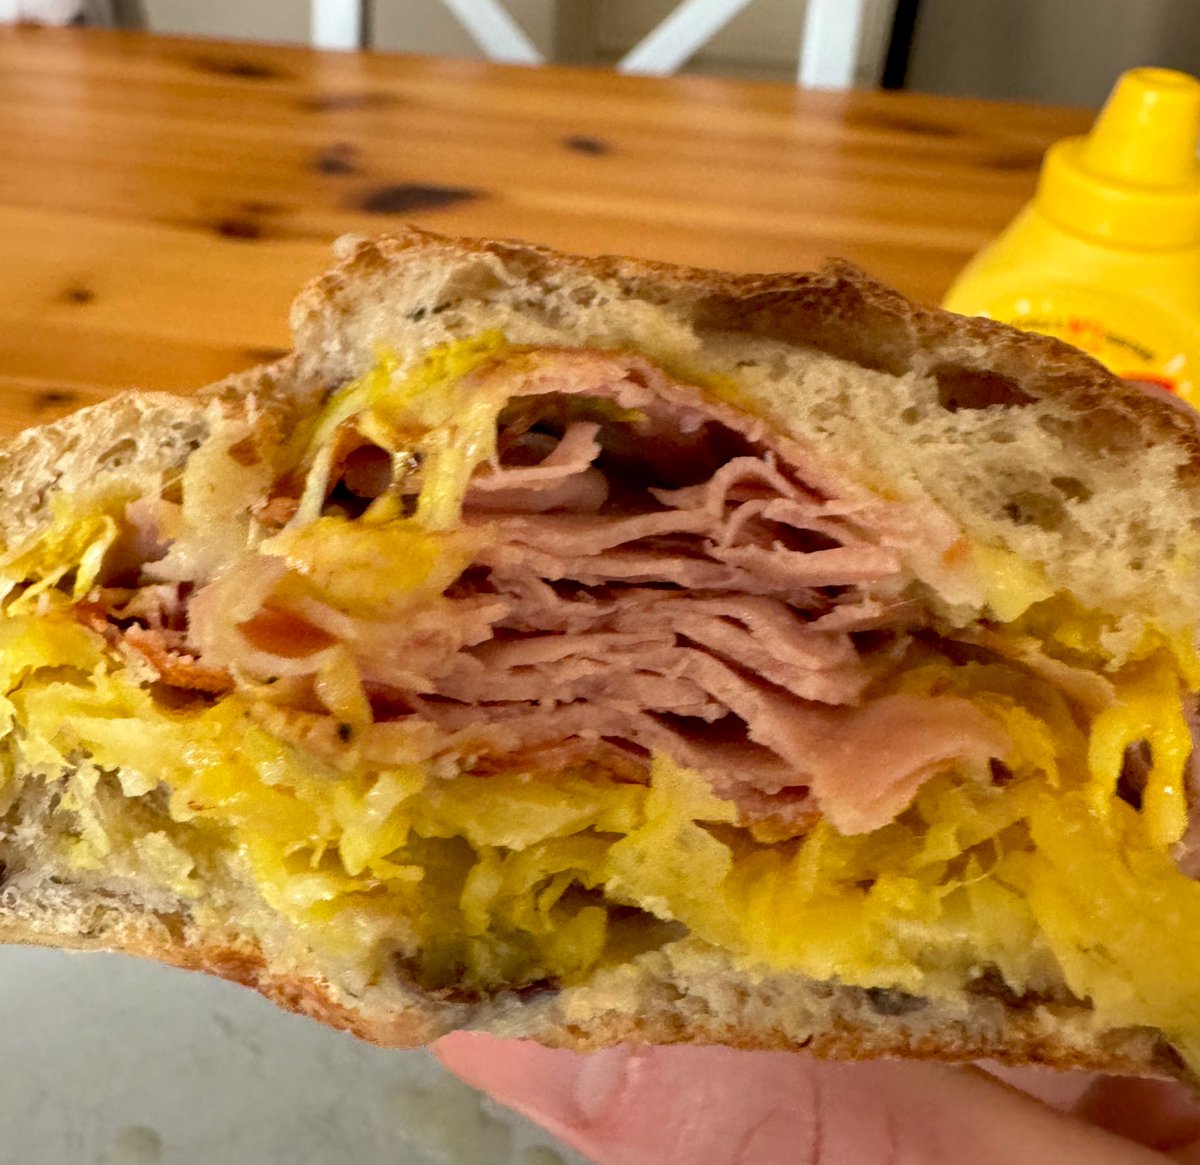 Giving the Anthony Bourdain fried mortadella sandwich a whirl. Stacked up thinly sliced mortadella fried in a pan (get the crispy bits going), melted some Gouda & applewood smoked cheese on top. Added into a ciabatta with @Frenchs mustard. Also added in some mustardy sauerkraut…